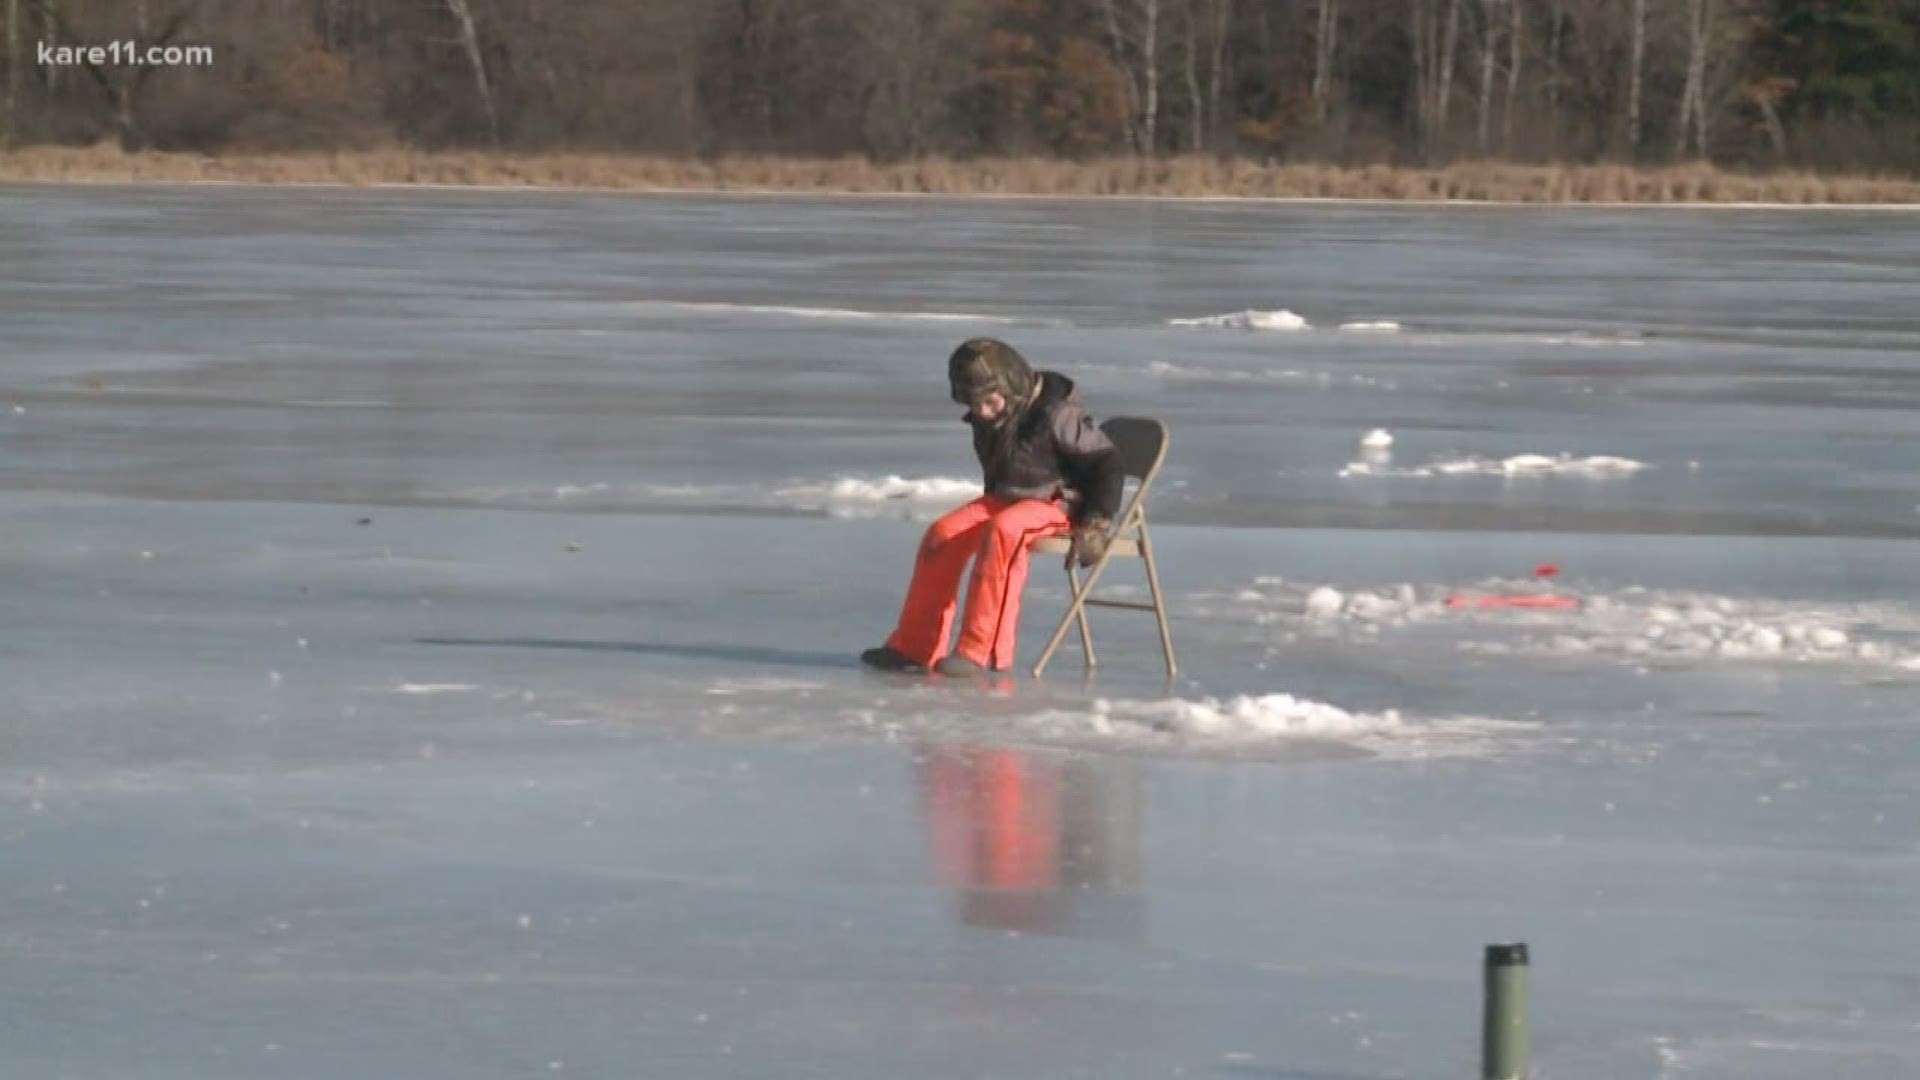 A bunch of kids busted out ice fishing rods Saturday on a frozen Coon Lake in Columbus. The nonprofit Union Sportsmen's Alliance teamed up with the Elevator Constructors Union to host a "Take Kids Ice Fishing Day."